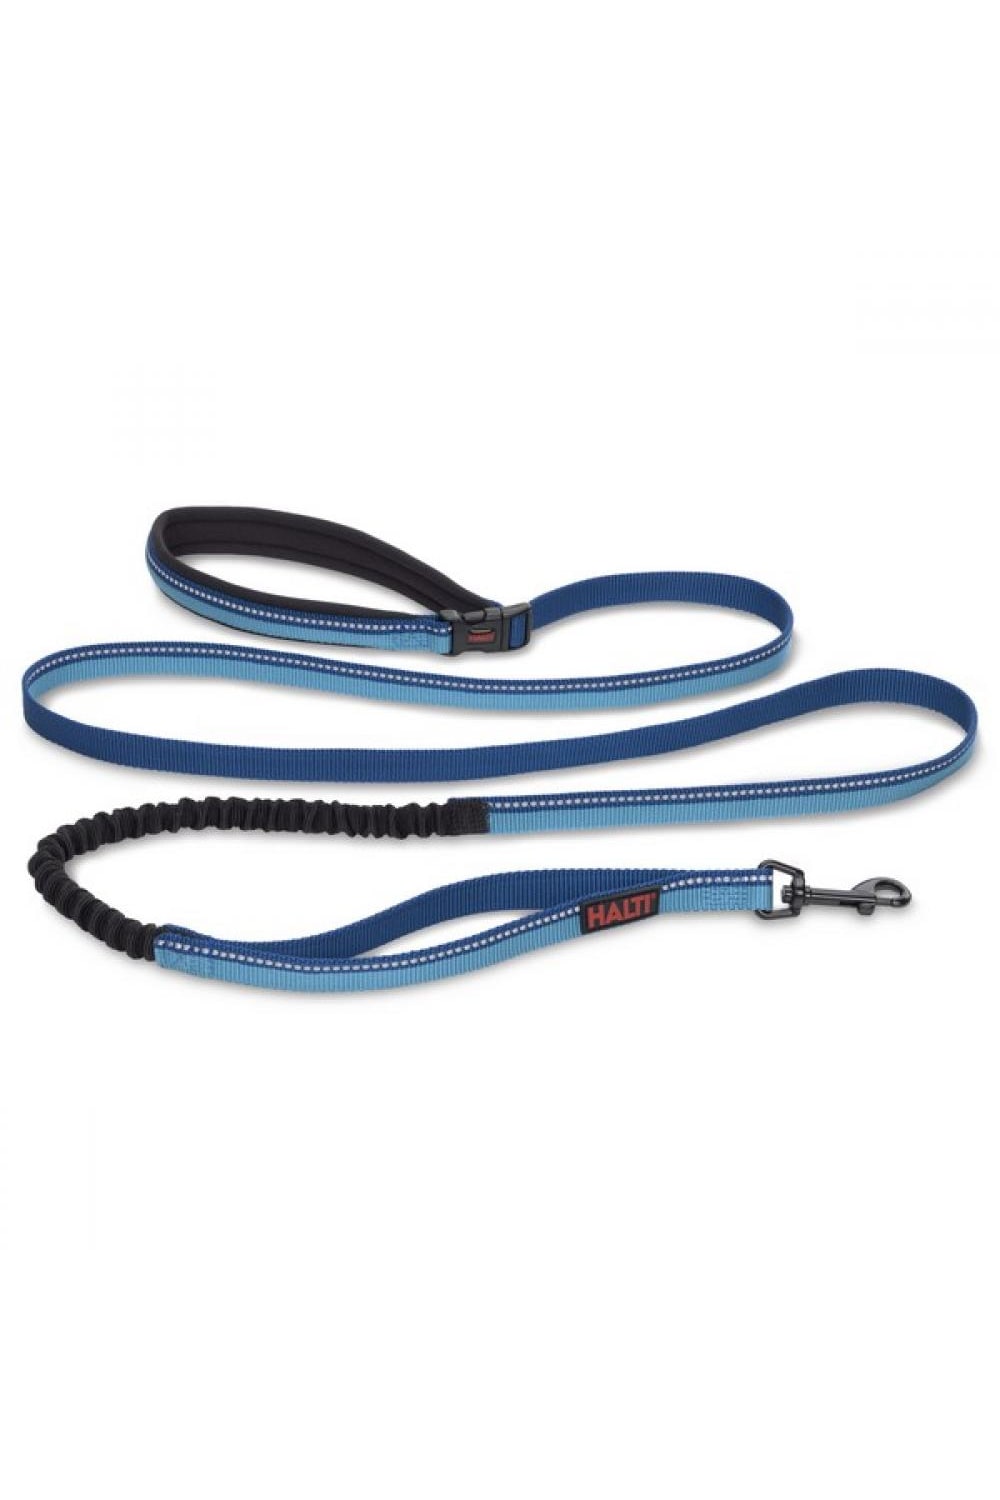 Company Of Animals Halti All In One Dog Leash (Blue) (Large)